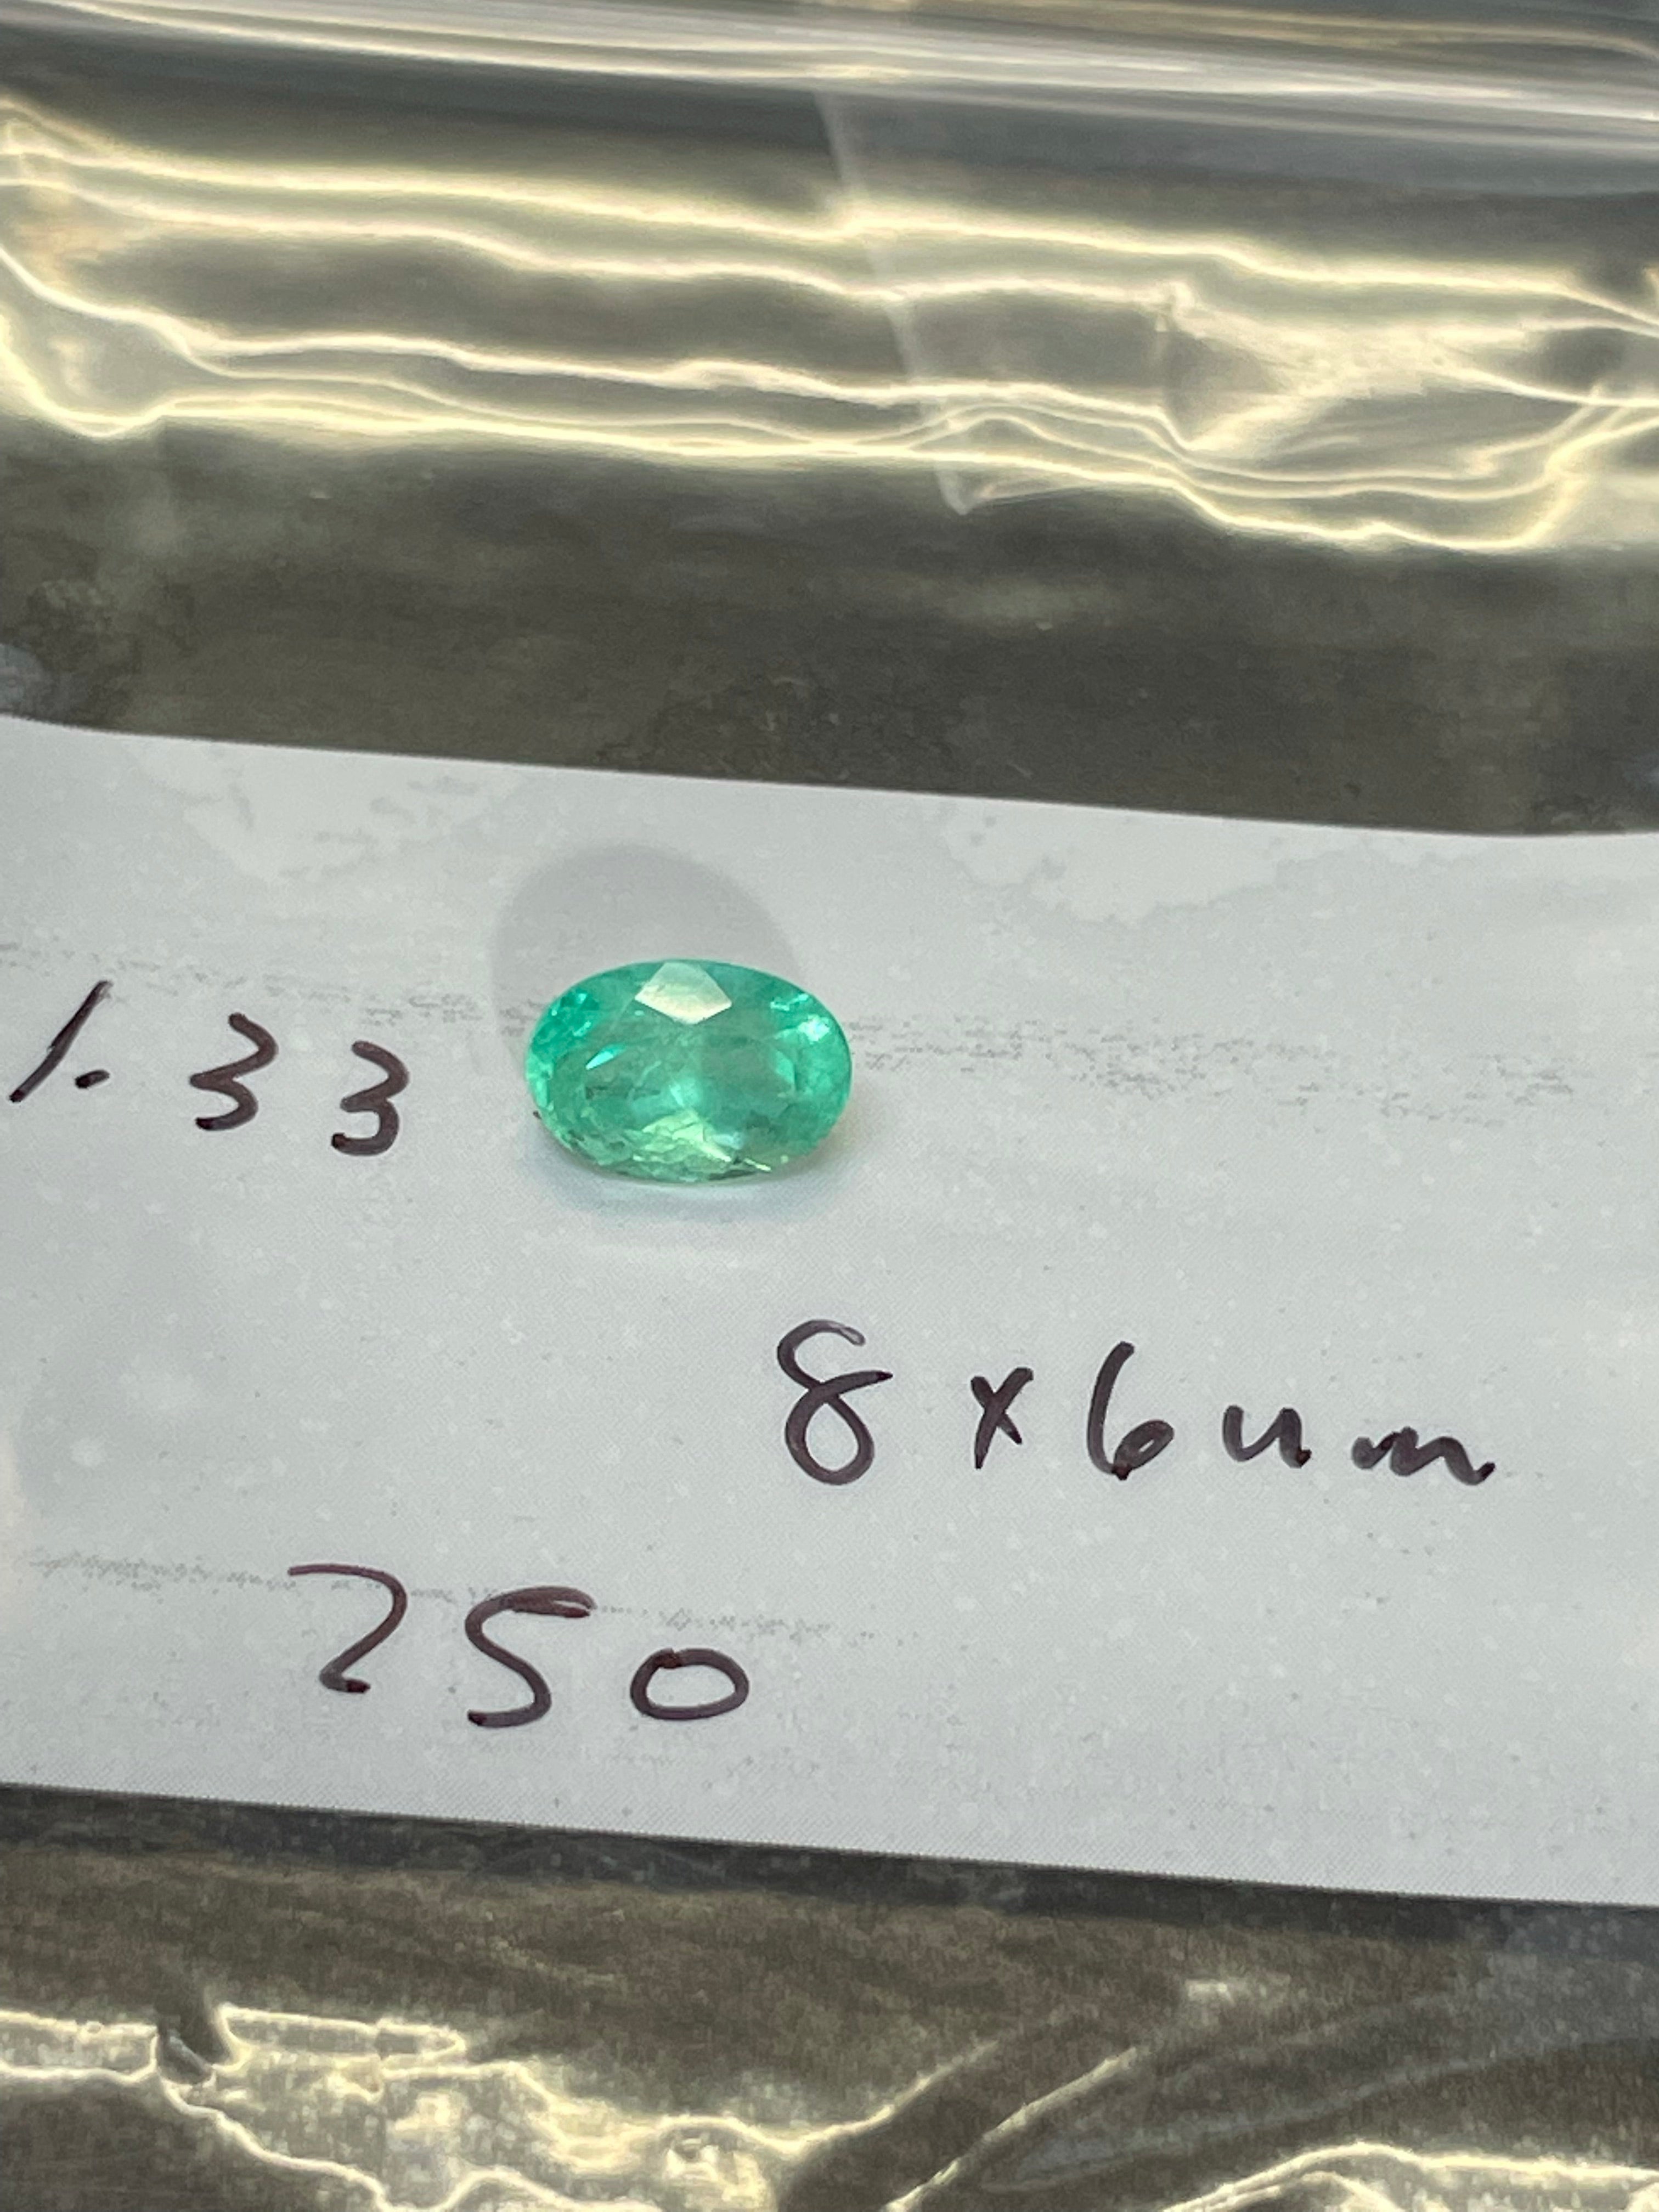 1.33CT Colombian Emerald Loose Oval Cut 8x6mm